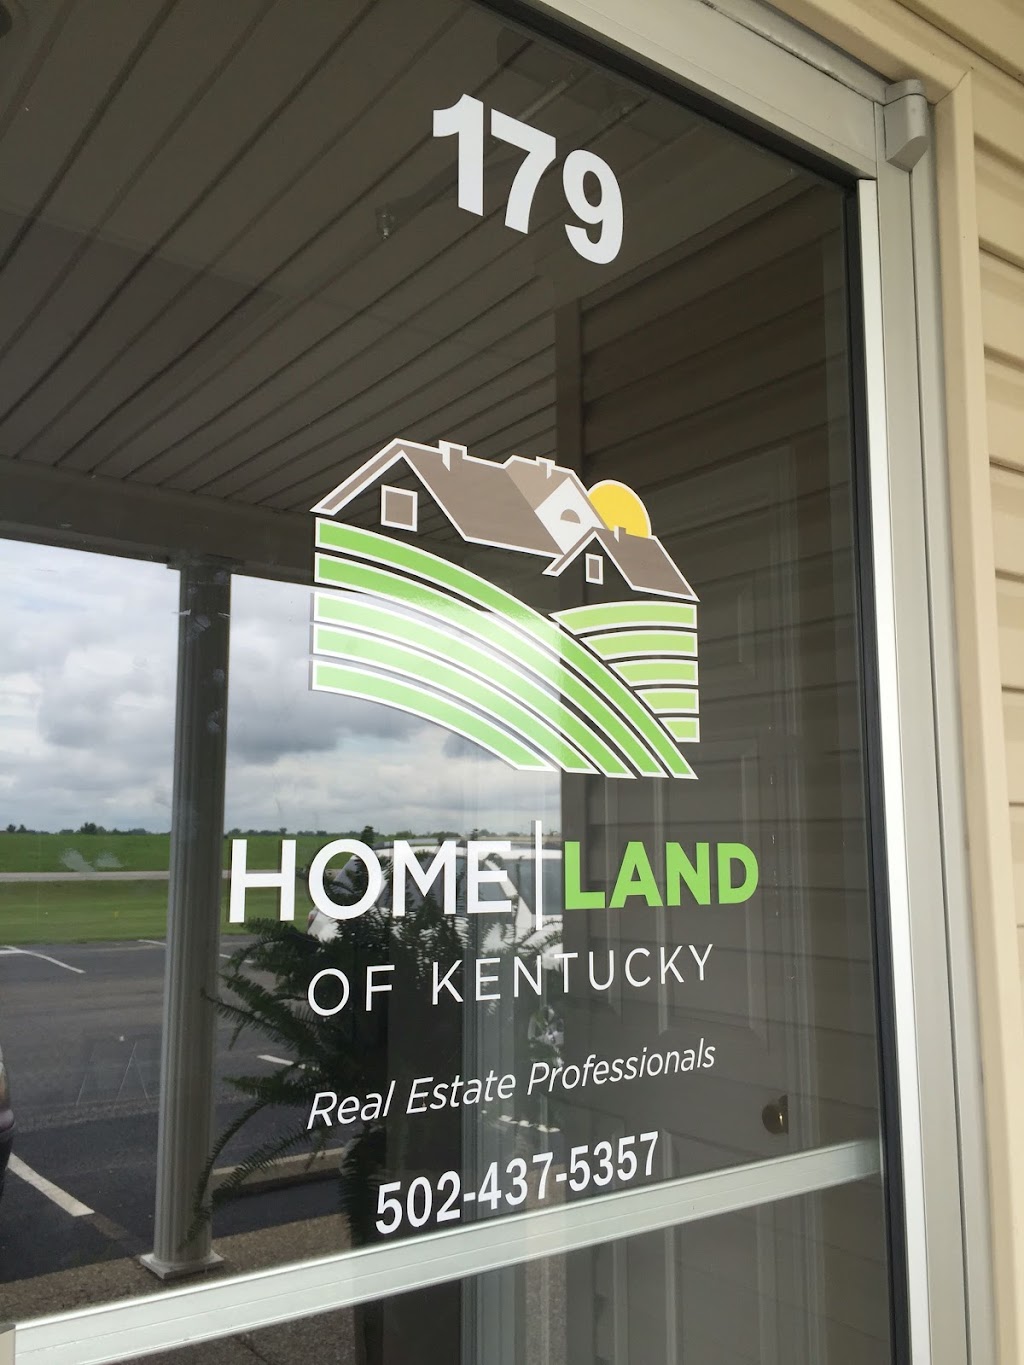 HOME|LAND of Kentucky Real Estate Professionals | 179 Alpine Rd, Shelbyville, KY 40065, USA | Phone: (502) 437-5357